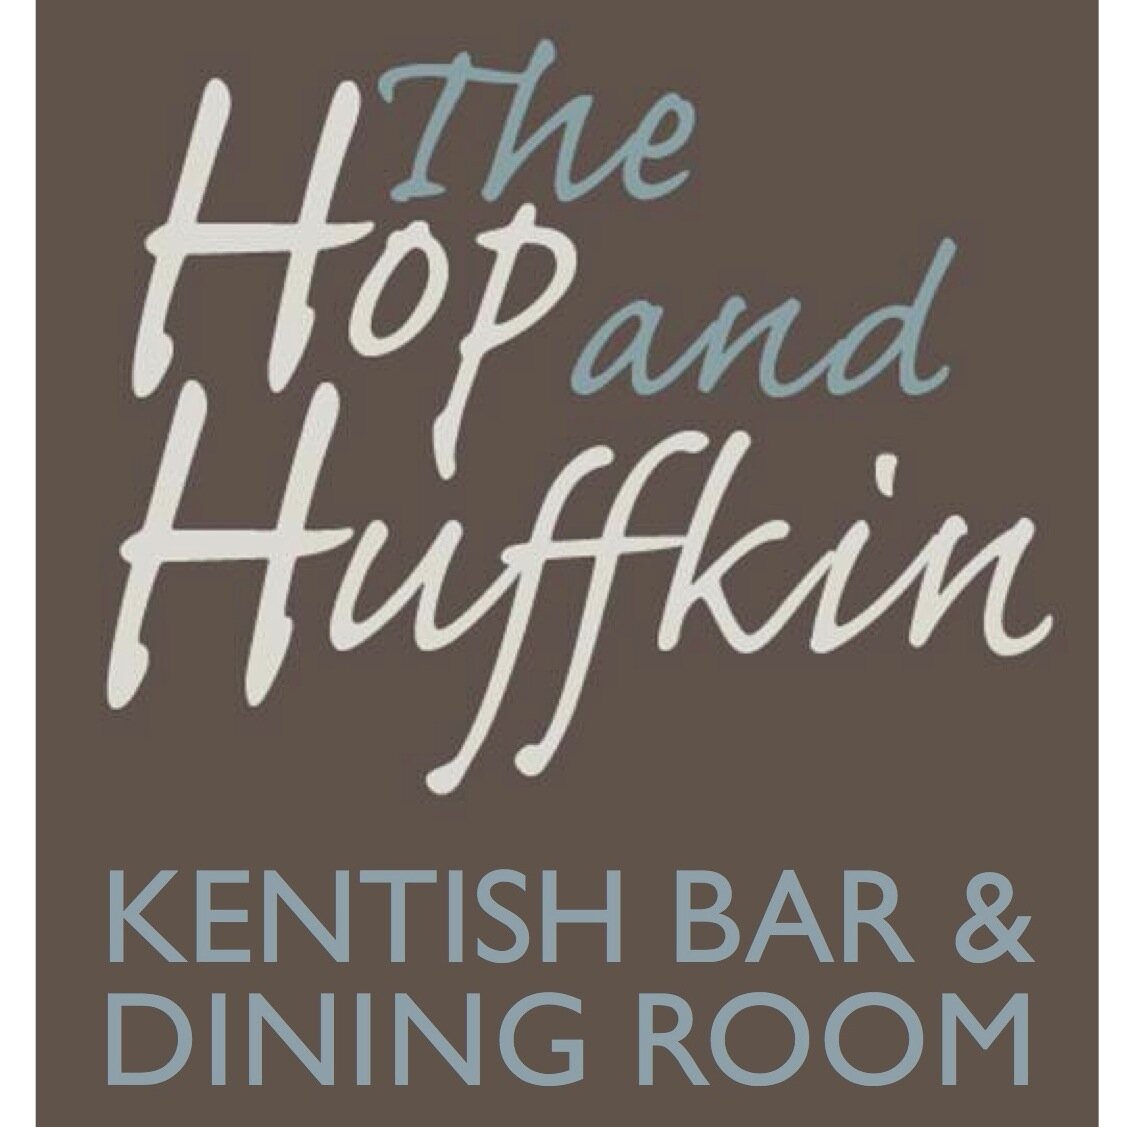 New to #Sandwich - The Hop and Huffkin - serving local ale, beer, wine & locally sourced #Kentish food. (Old St Peter's restaurant) #supportlocal